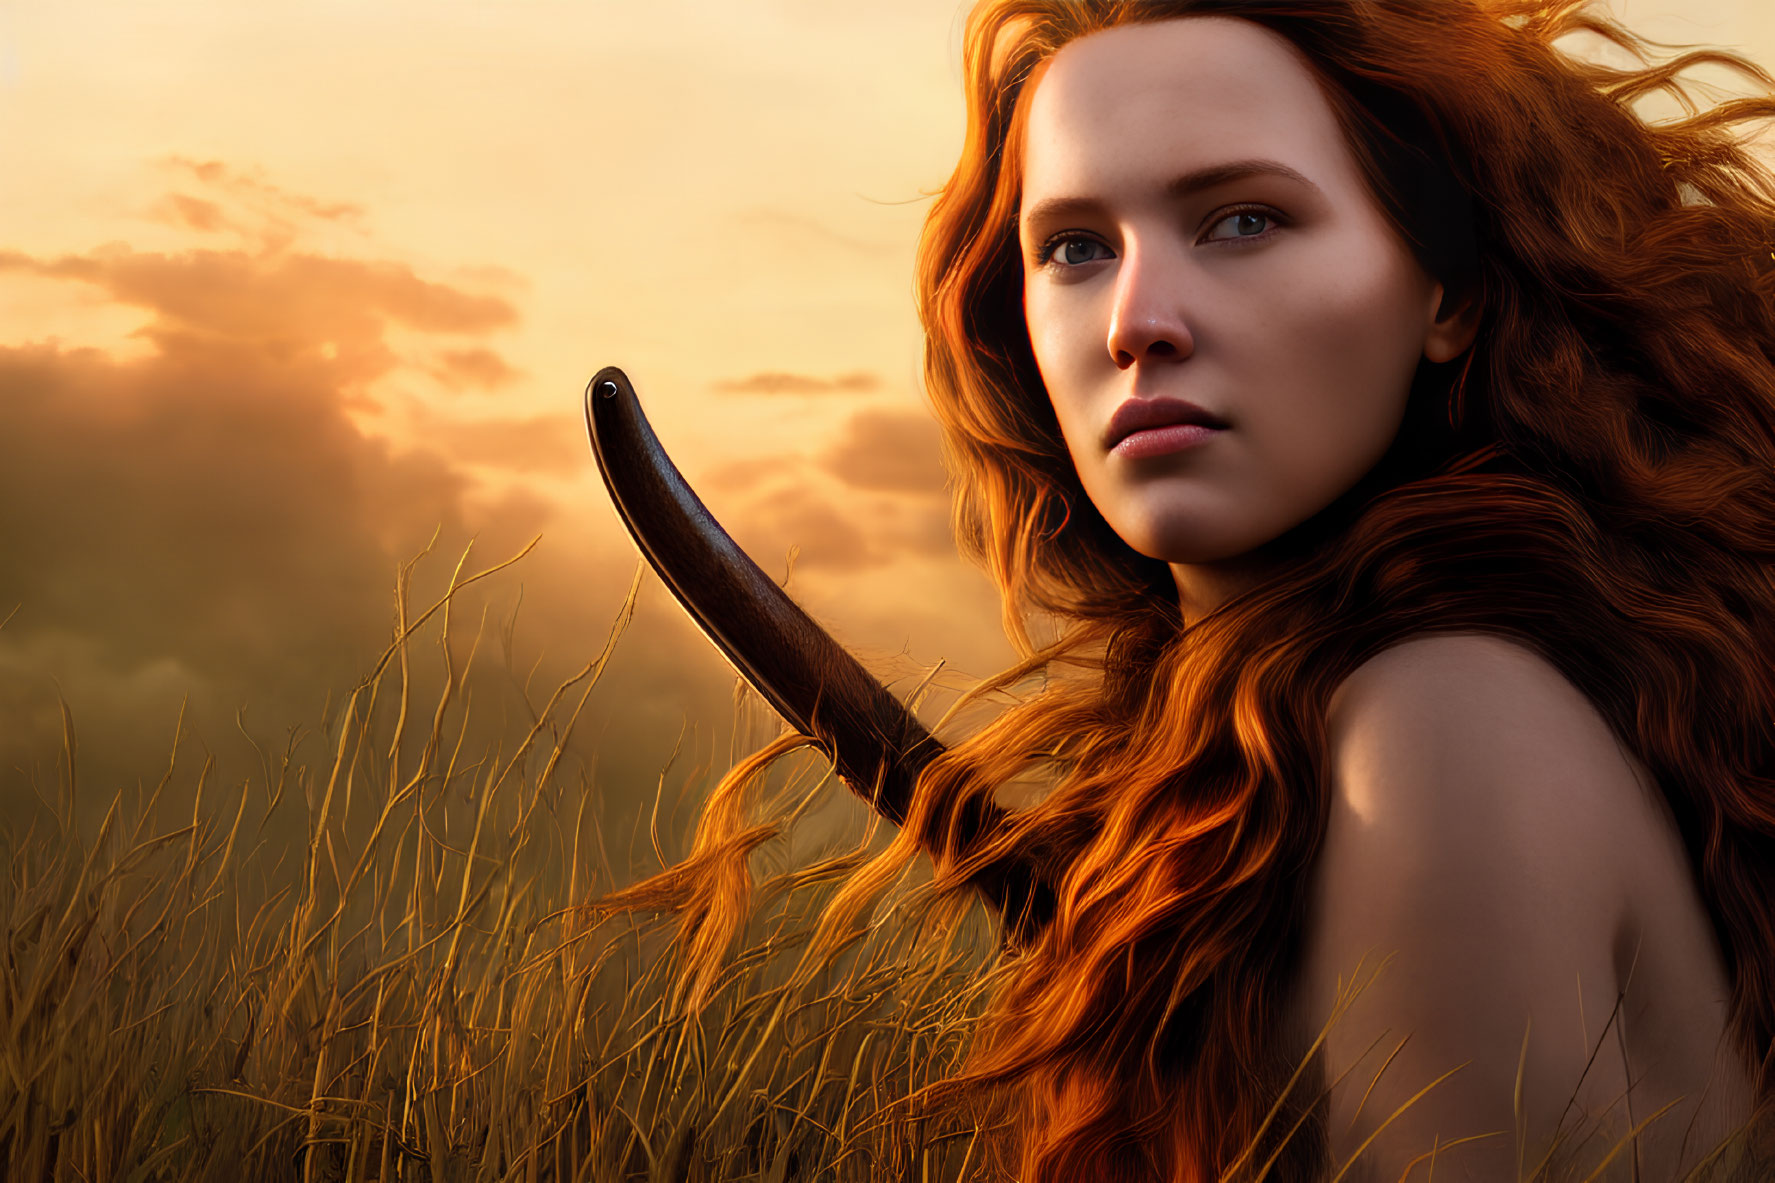 Woman with Red Hair Holding Knife in Golden Field at Sunset